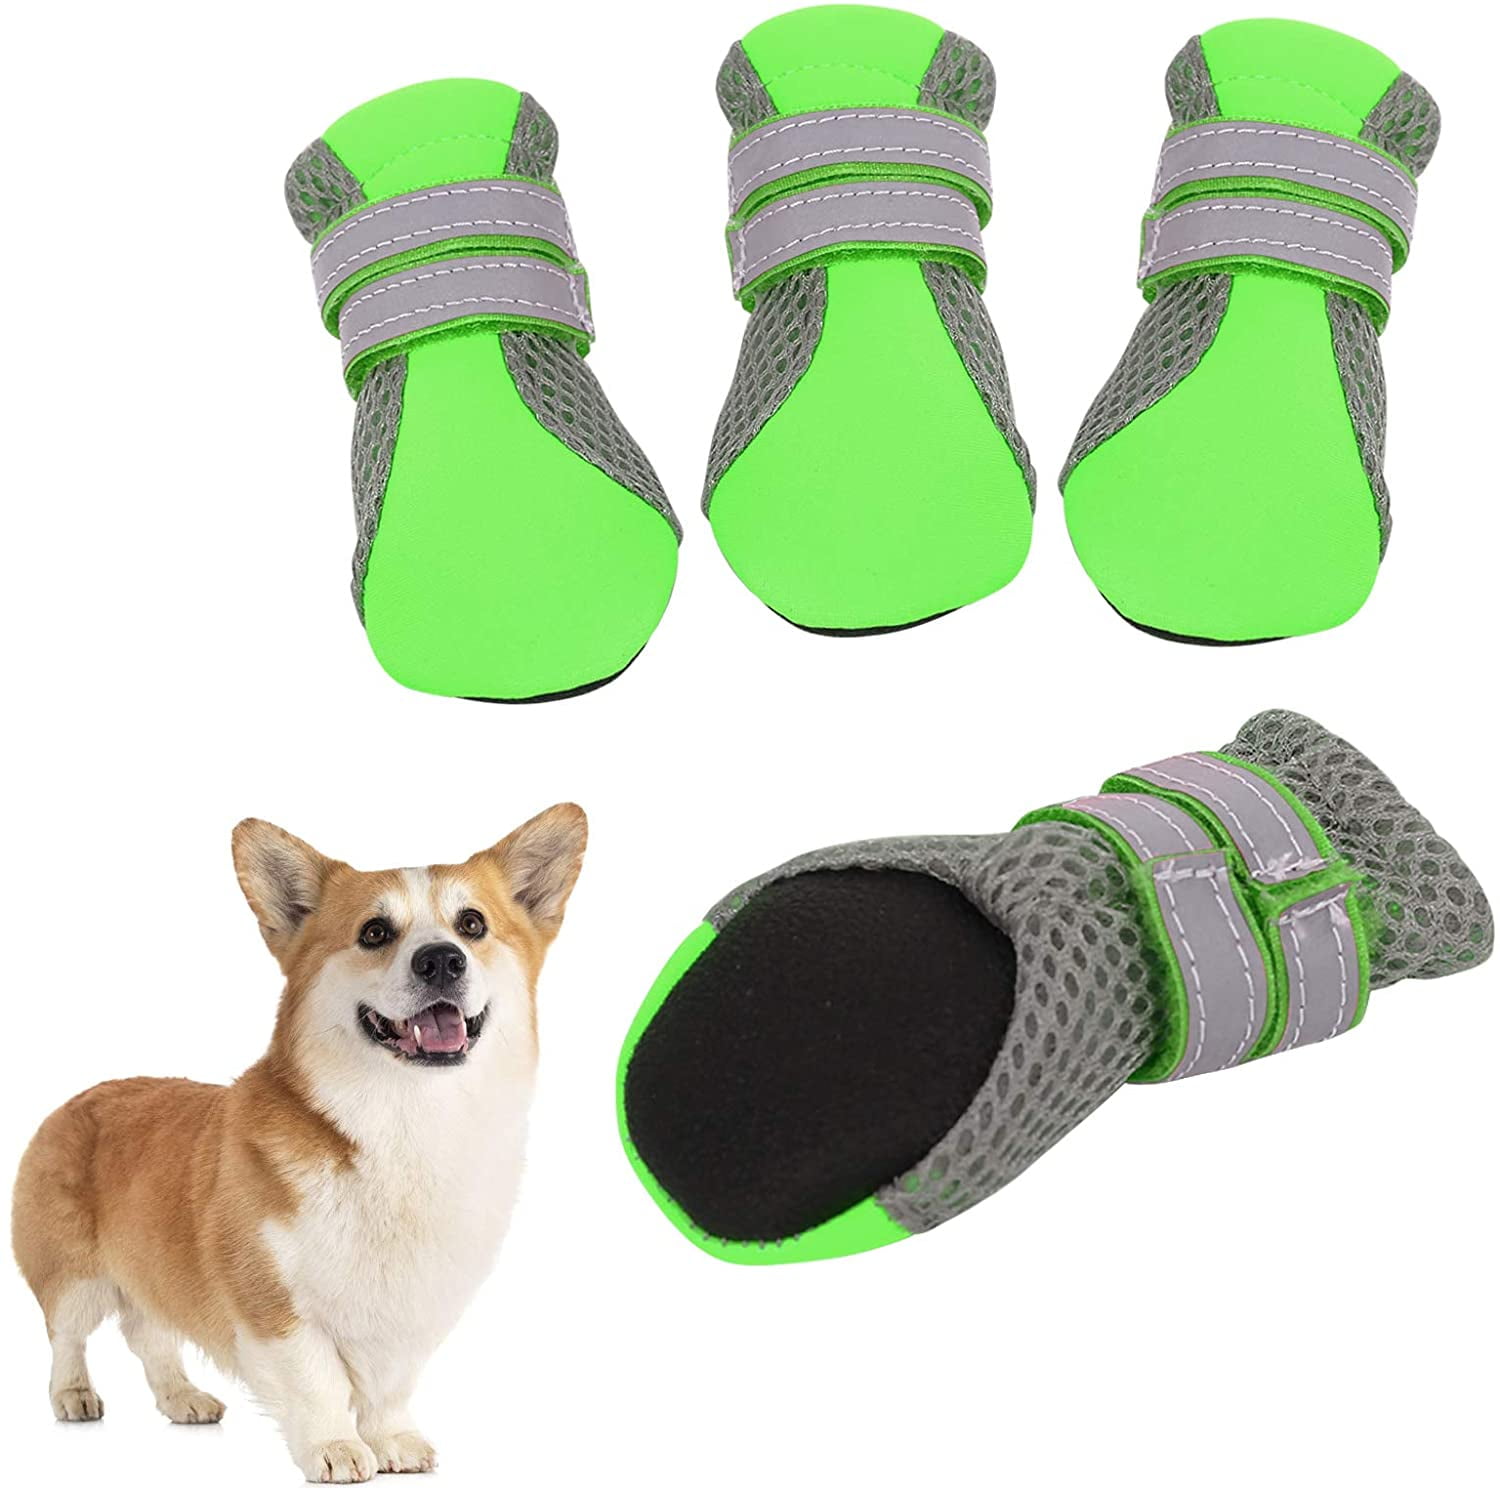 Heat Protection CADO SHY Dog Booties for Small Dogs Dog Shoes for Small Dogs Hot Pavement Breathable Material Dog Summer Hiking Boots for Anti-Slip 